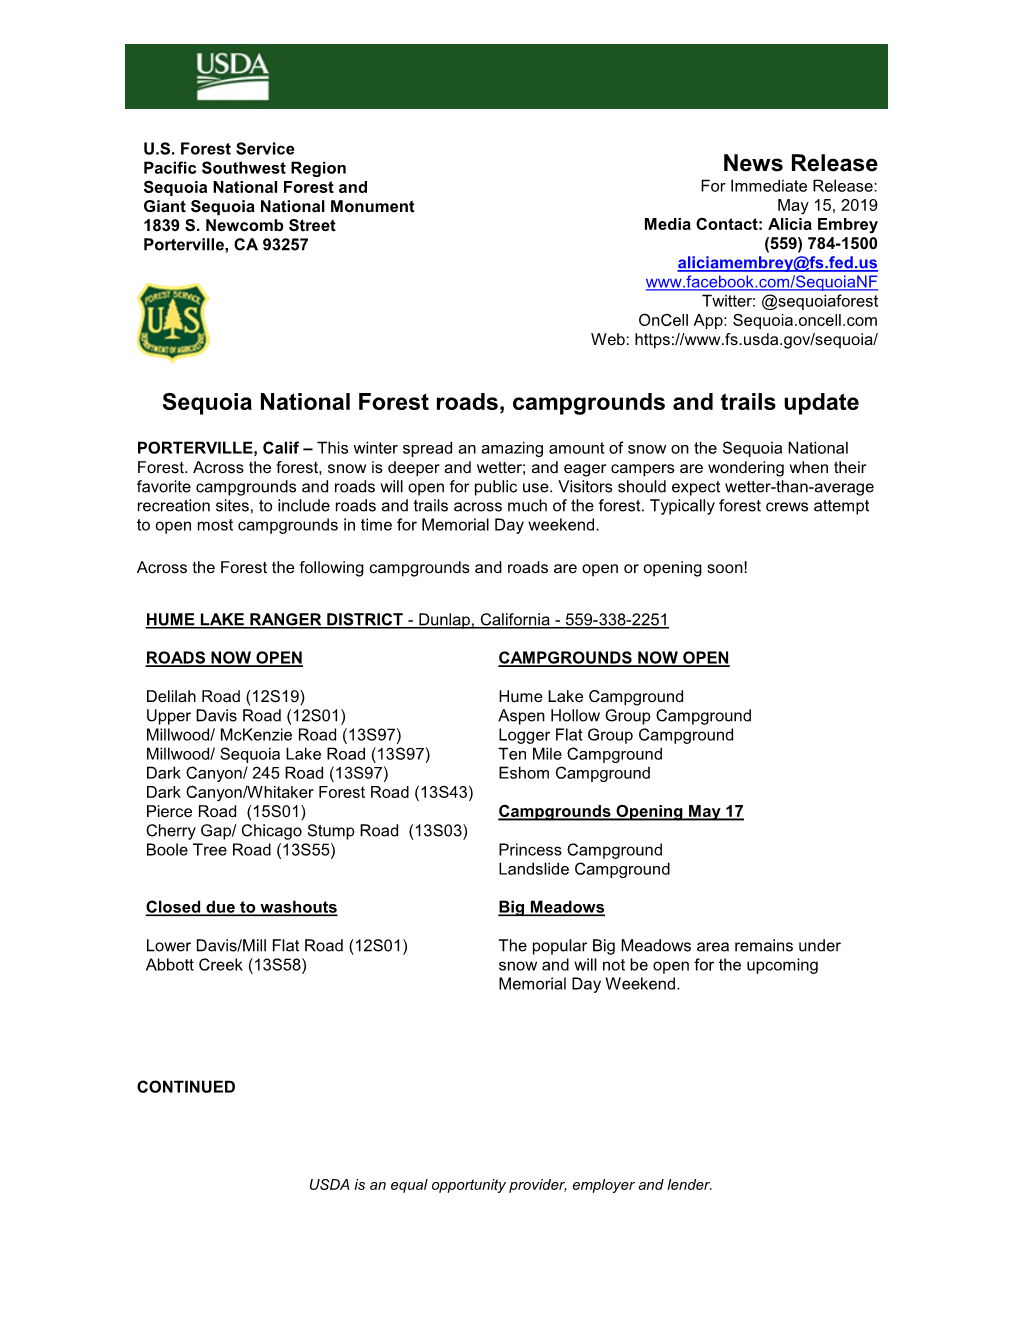 News Release Sequoia National Forest Roads, Campgrounds and Trails Update